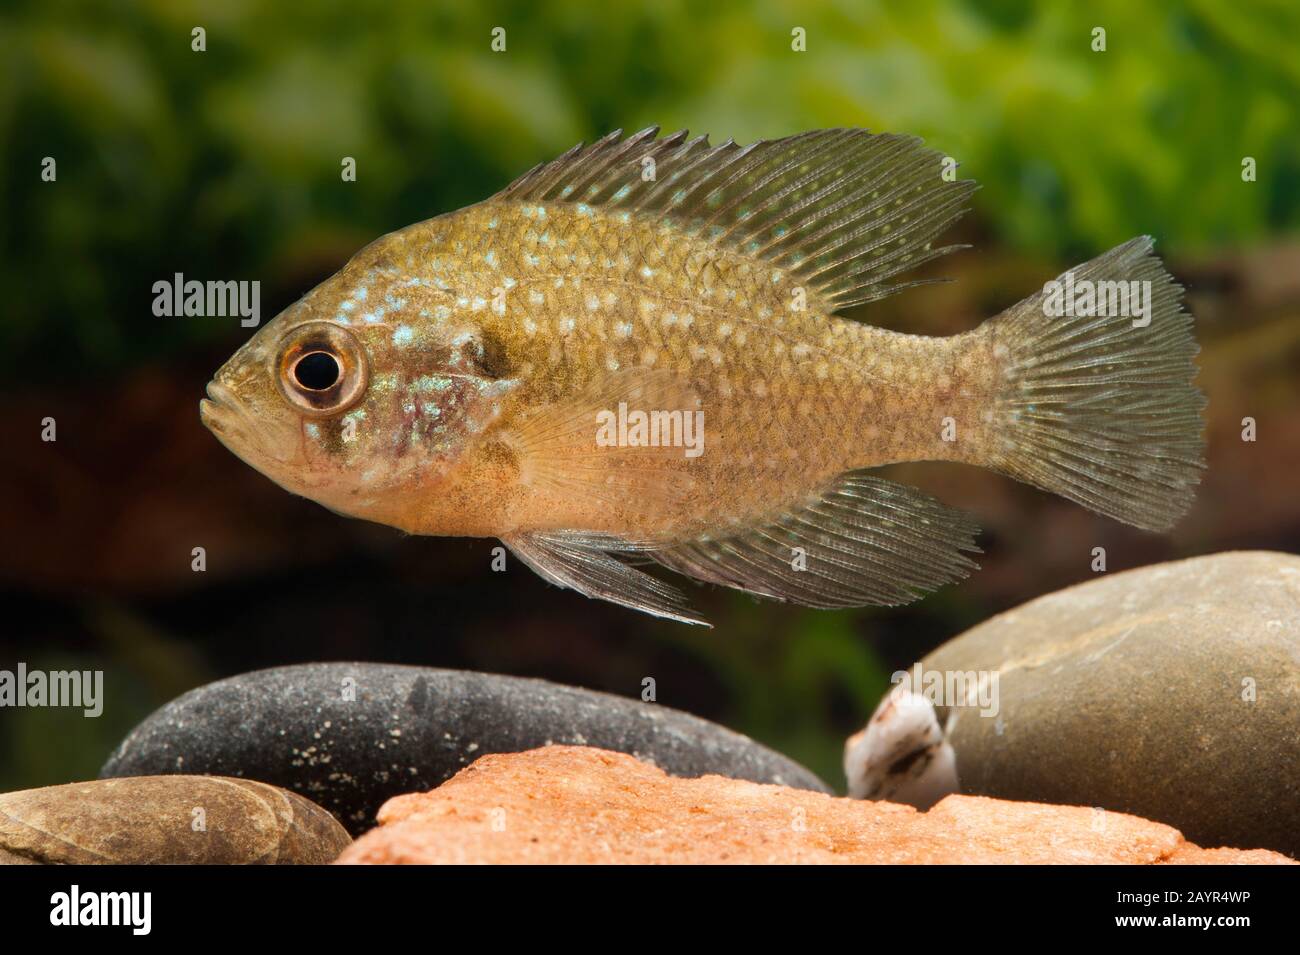 Bluespotted sunfish (Enneacanthus gloriosus), side view Stock Photo